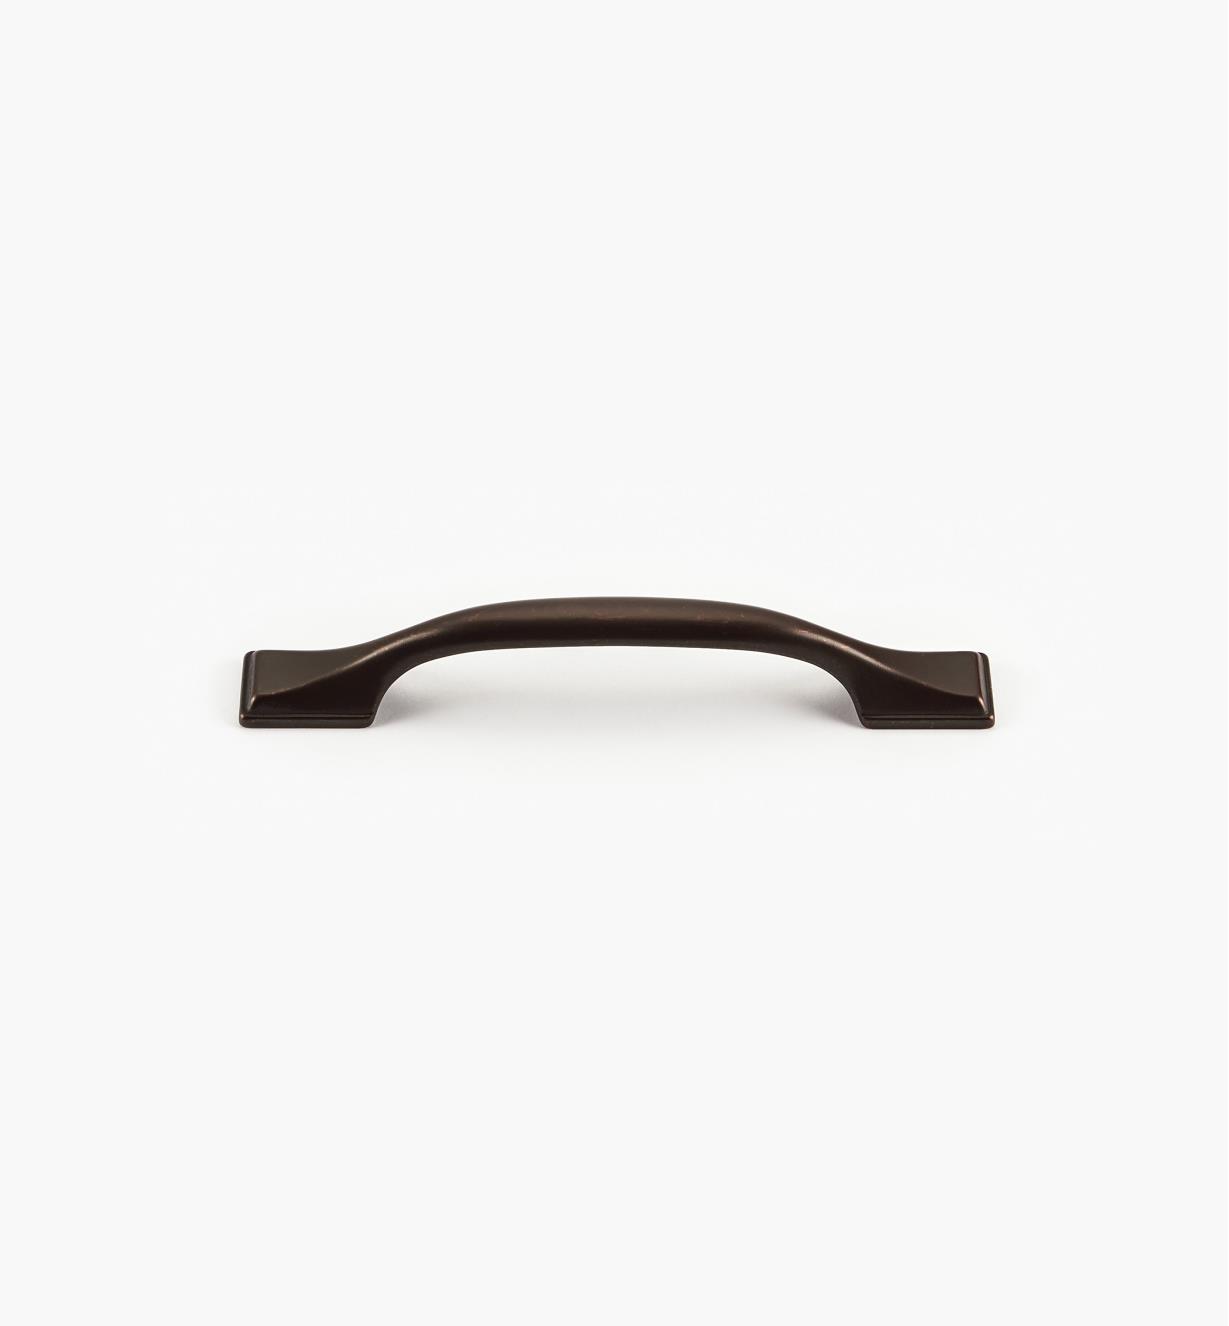 00A7286 - 128mm Handle (7")